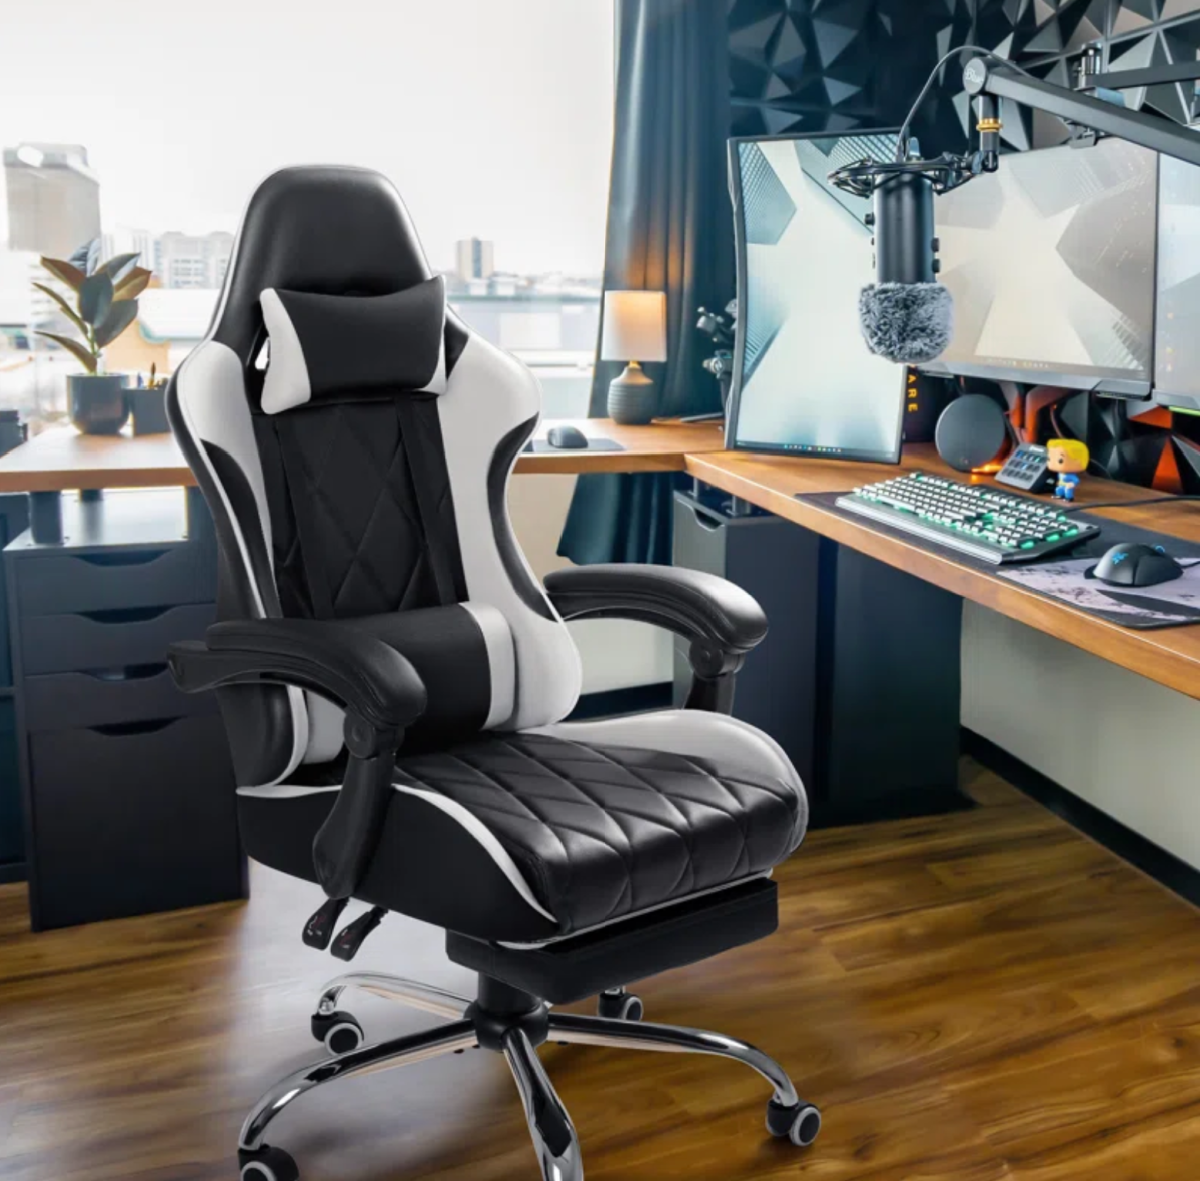 A faux leather gaming chair from Wayfair which makes it one of the more thoughtful last minute Christmas gift ideas